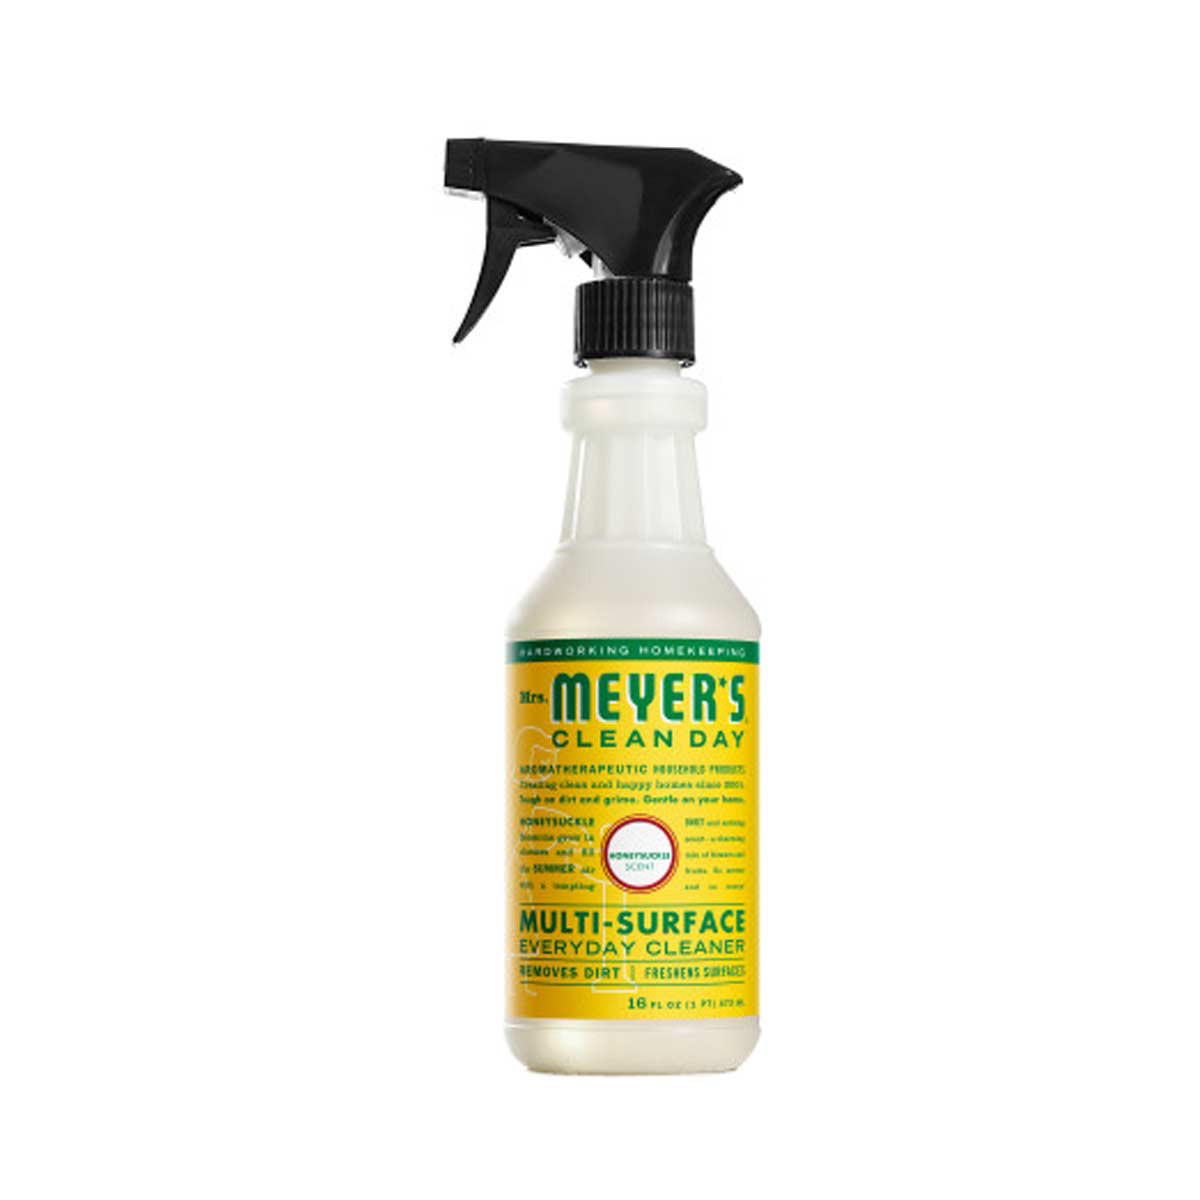 Mrs. Meyer’s Multi-Surface Everyday Cleaner